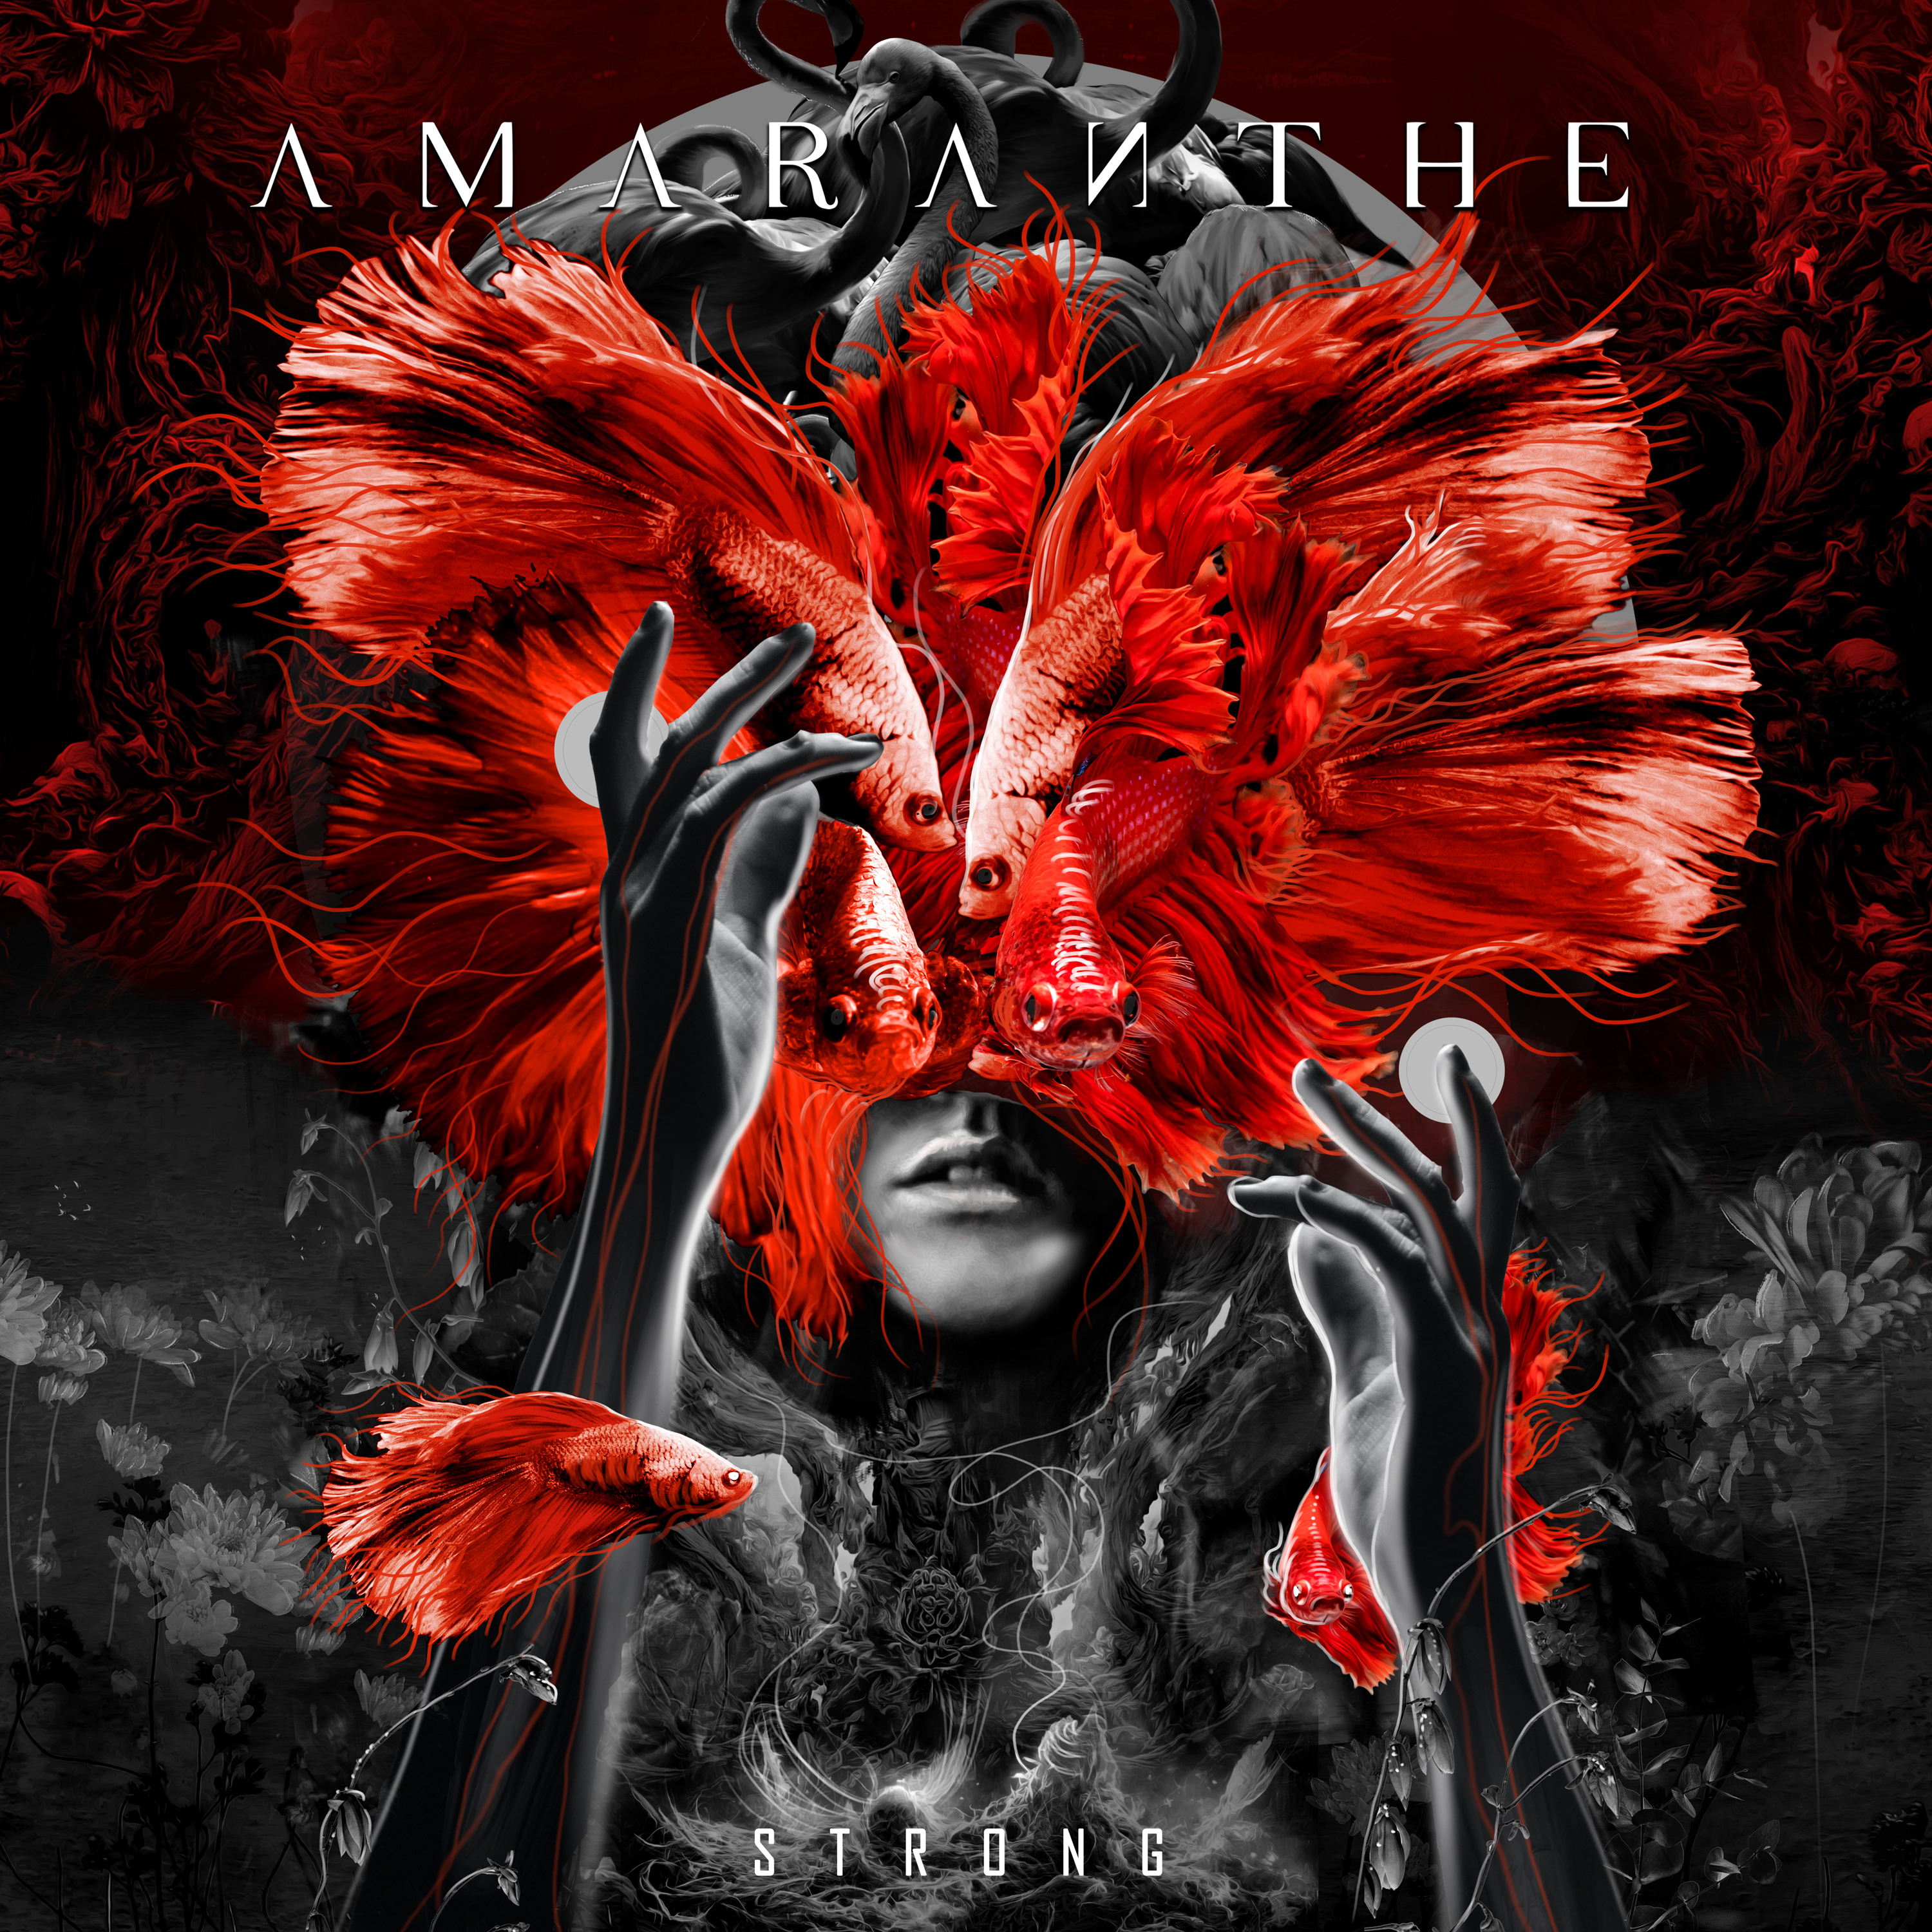 AMARANTHE - Release Cinematic Version Of "Strong" As New Single!